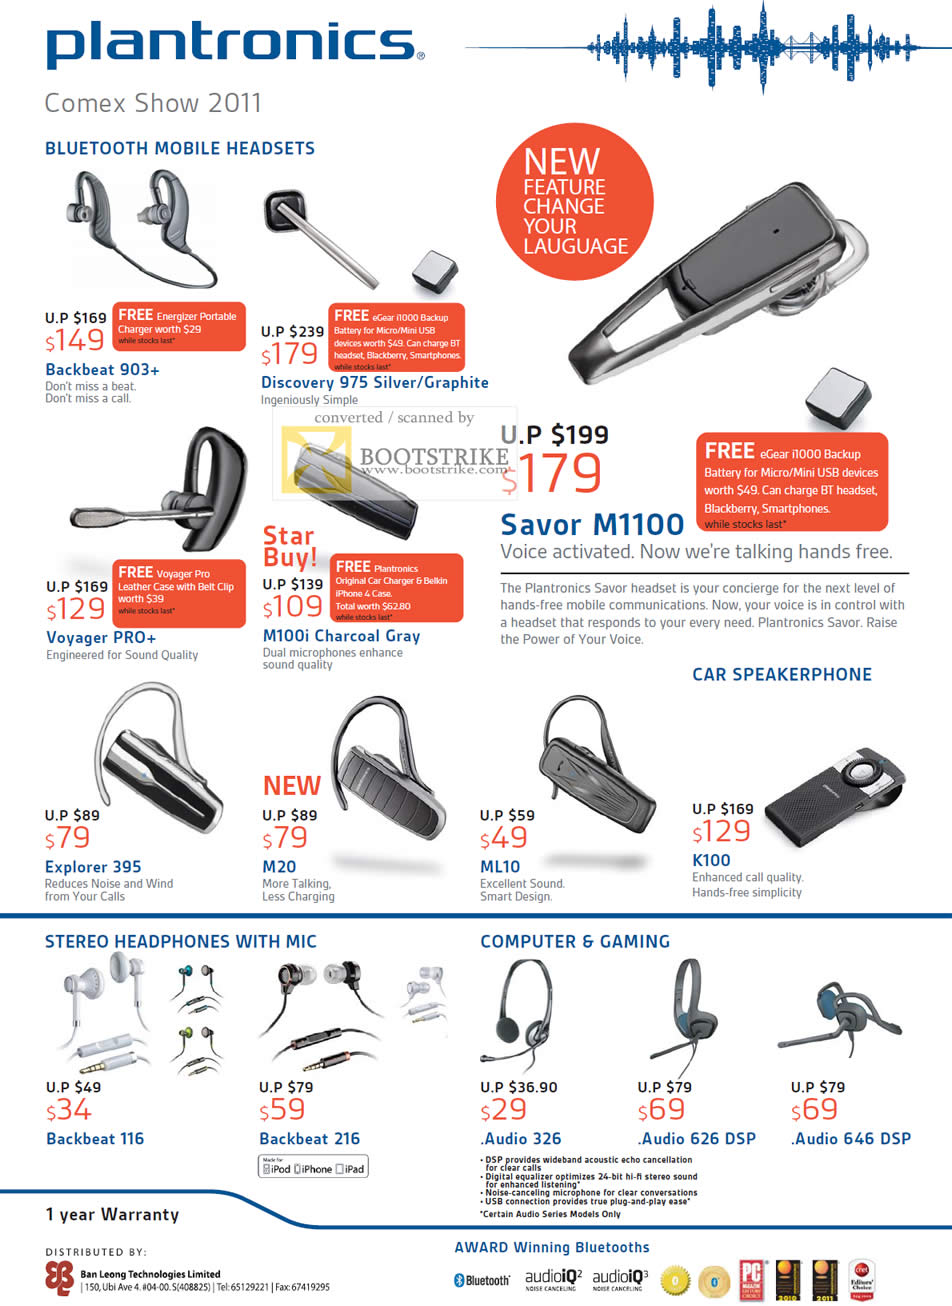 COMEX 2011 price list image brochure of Plantronics Headsets Bluetooth Backbeat 903 Discovery 975 Silver Graphite Savor M1100 M100i Voyager Pro Explorer 395 M20 ML10 K100 116 216 Audio 326 626 DSP 646